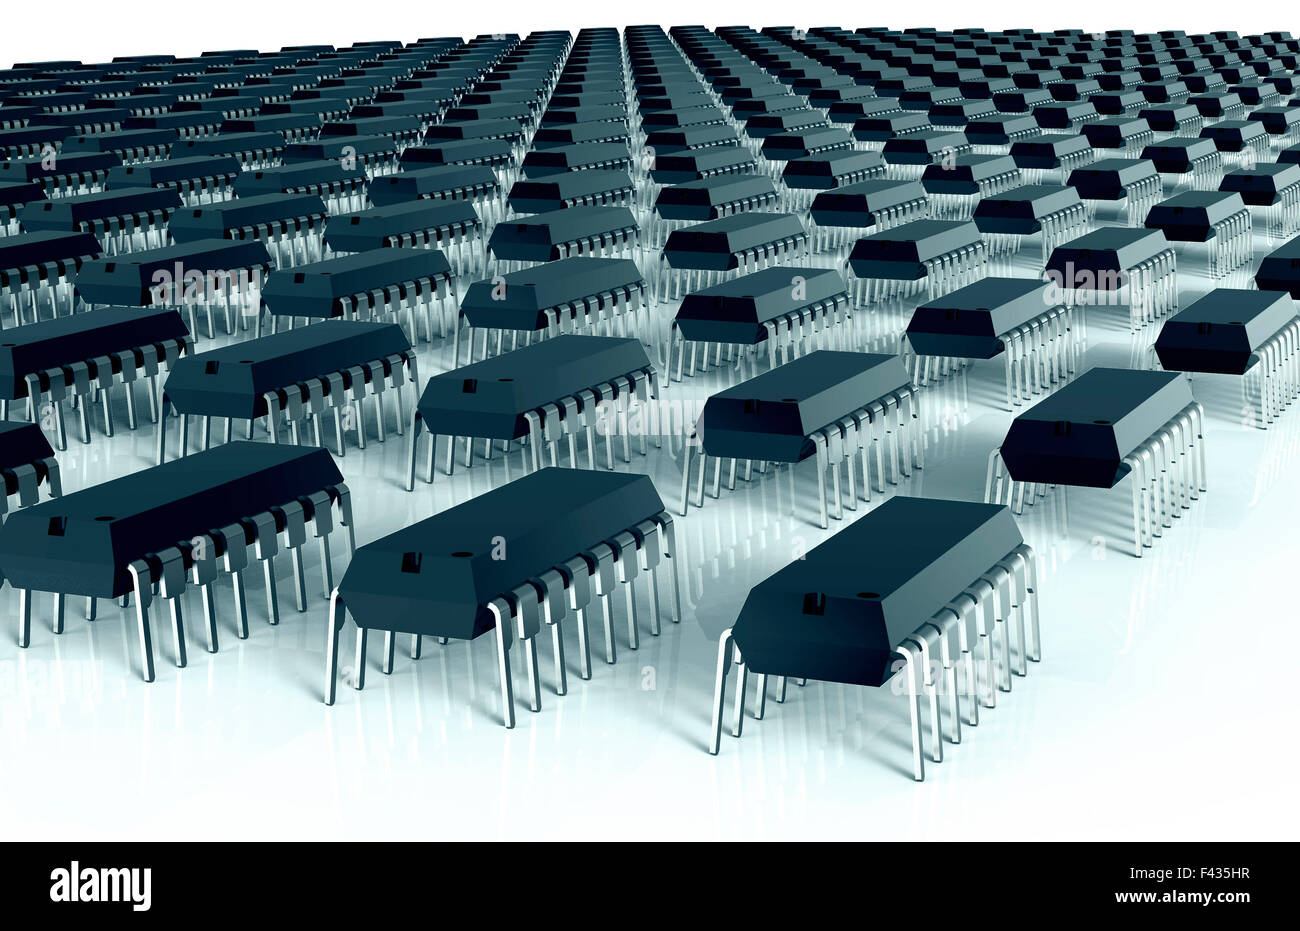 computer chips aligned as an army of bugs. Stock Photo